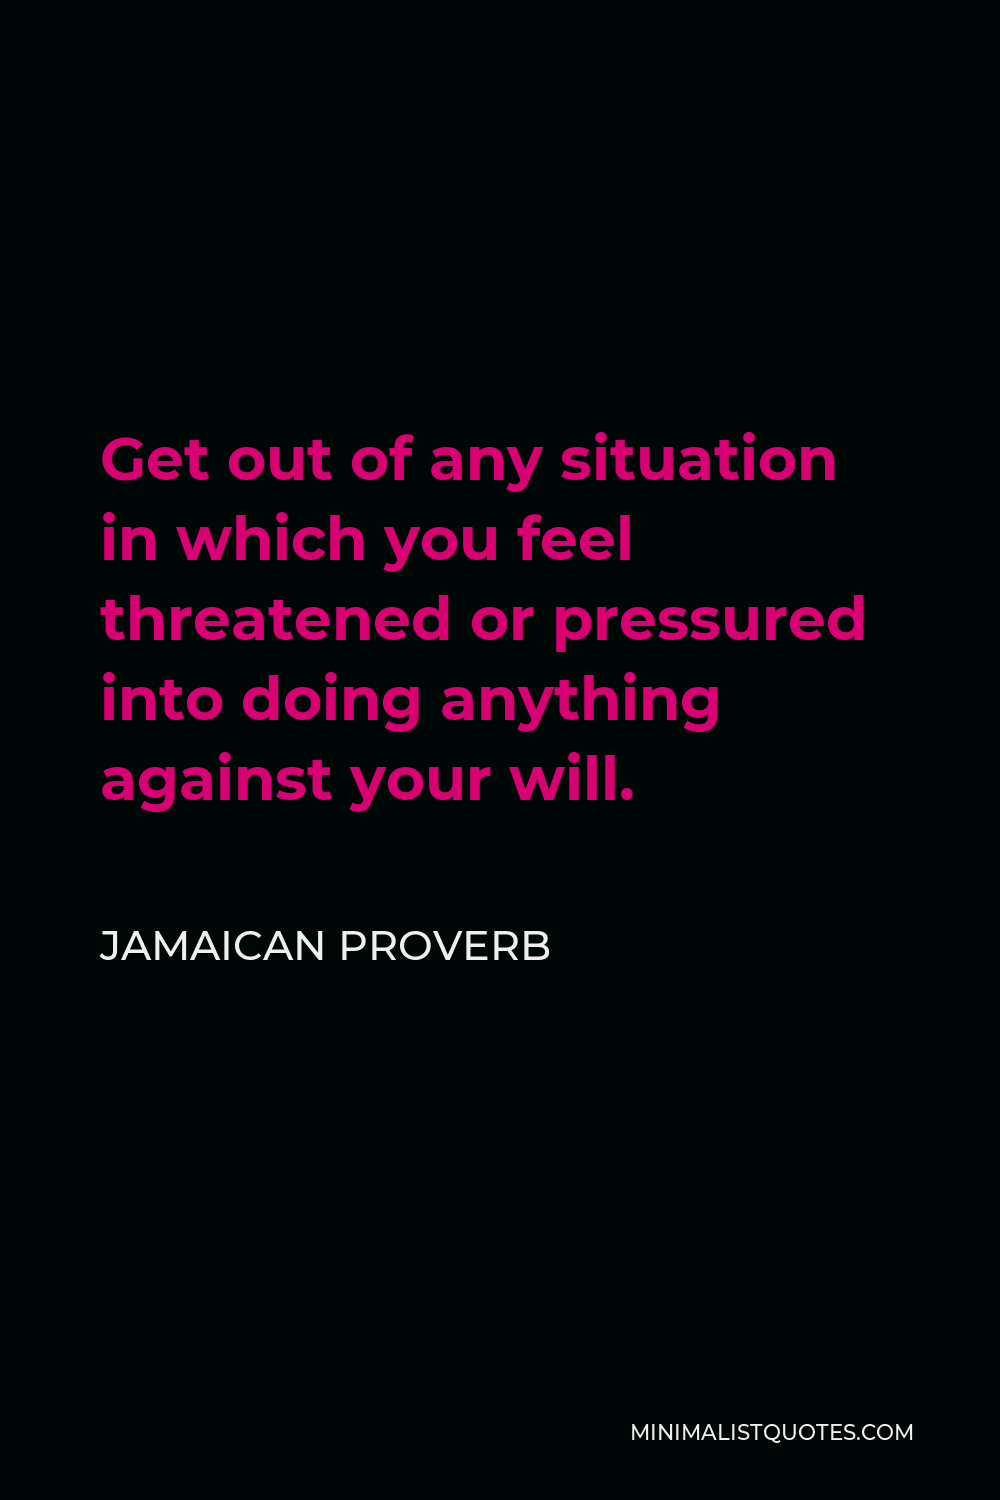 Jamaican Proverb Quote - Get out of any situation in which you feel threatened or pressured into doing anything against your will.